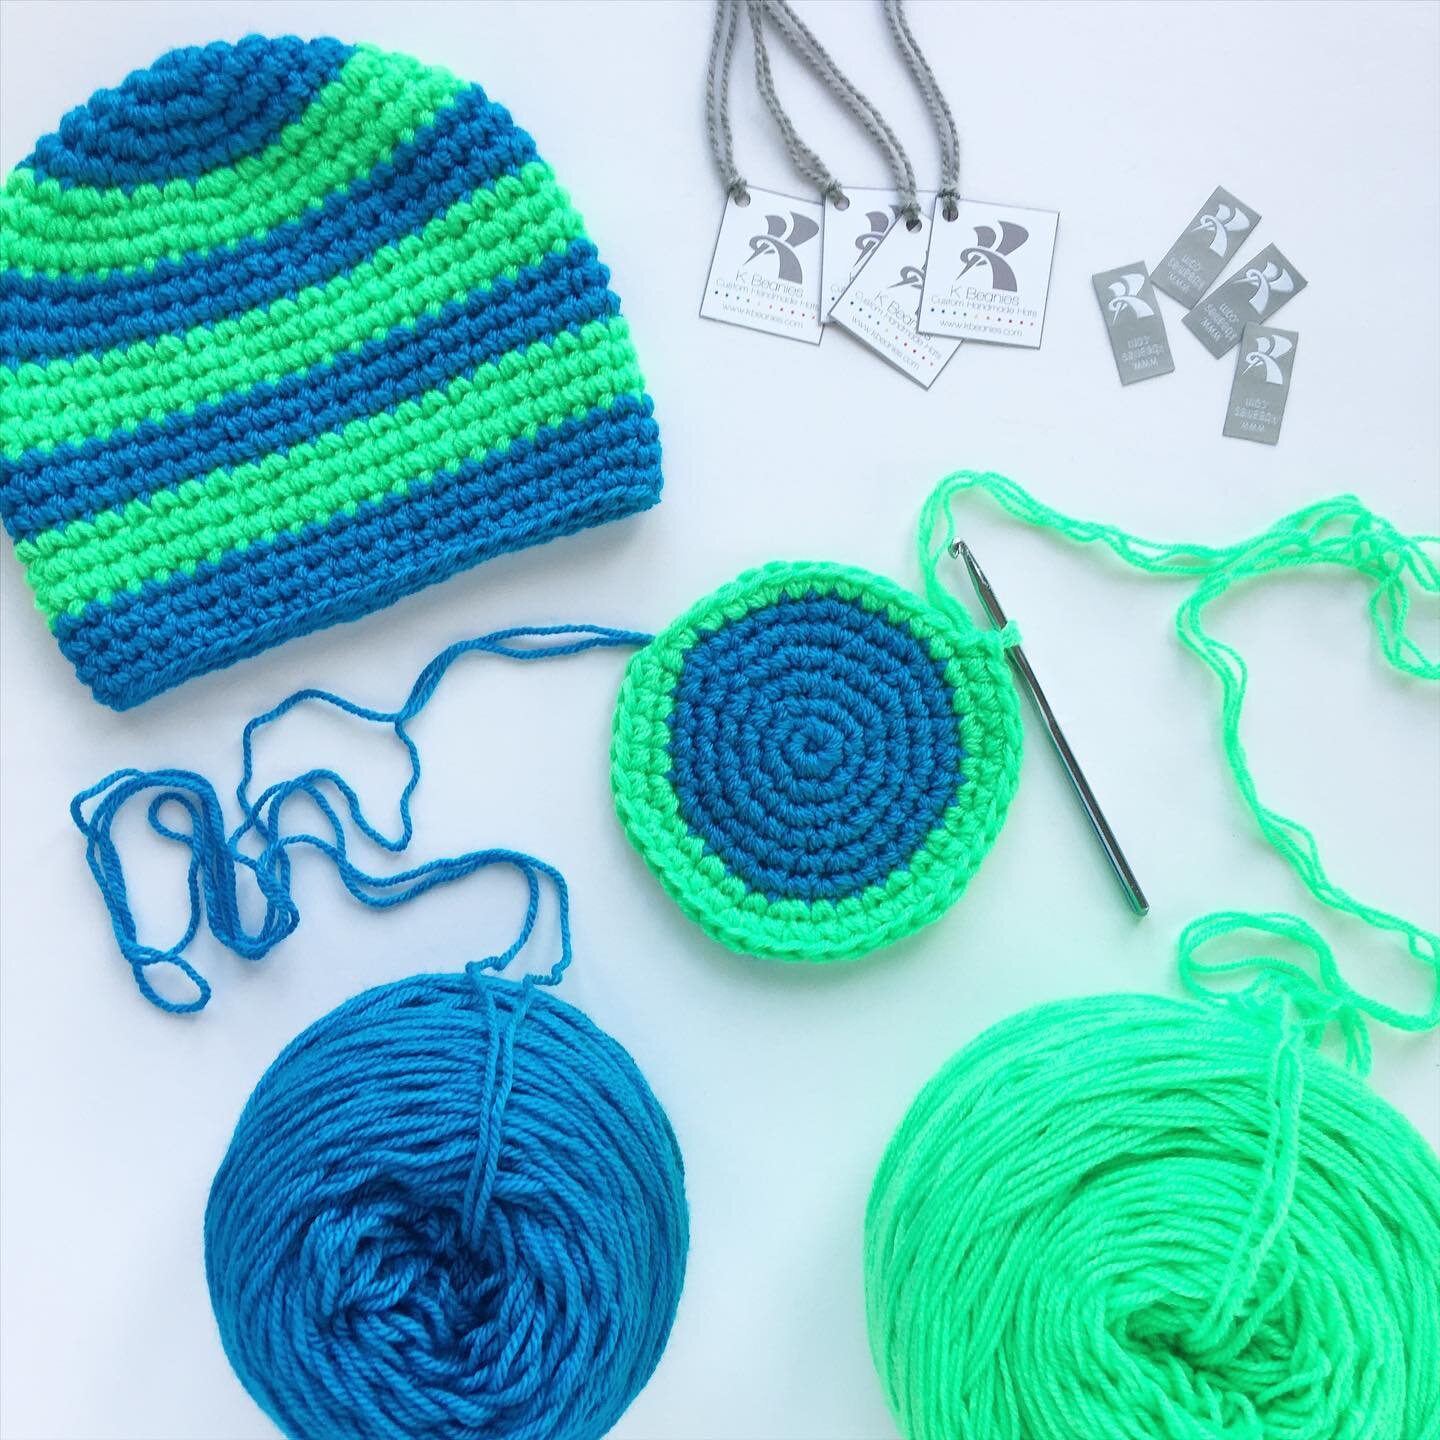 Working on these lovelies for an Etsy order today. 
Grateful for the chance to live in my little yarn filled bubble for just a little while longer. 💙💚 Available from www.etsy.com/uk/shop/KBeanies 
__________________________________✍️
#designyourown